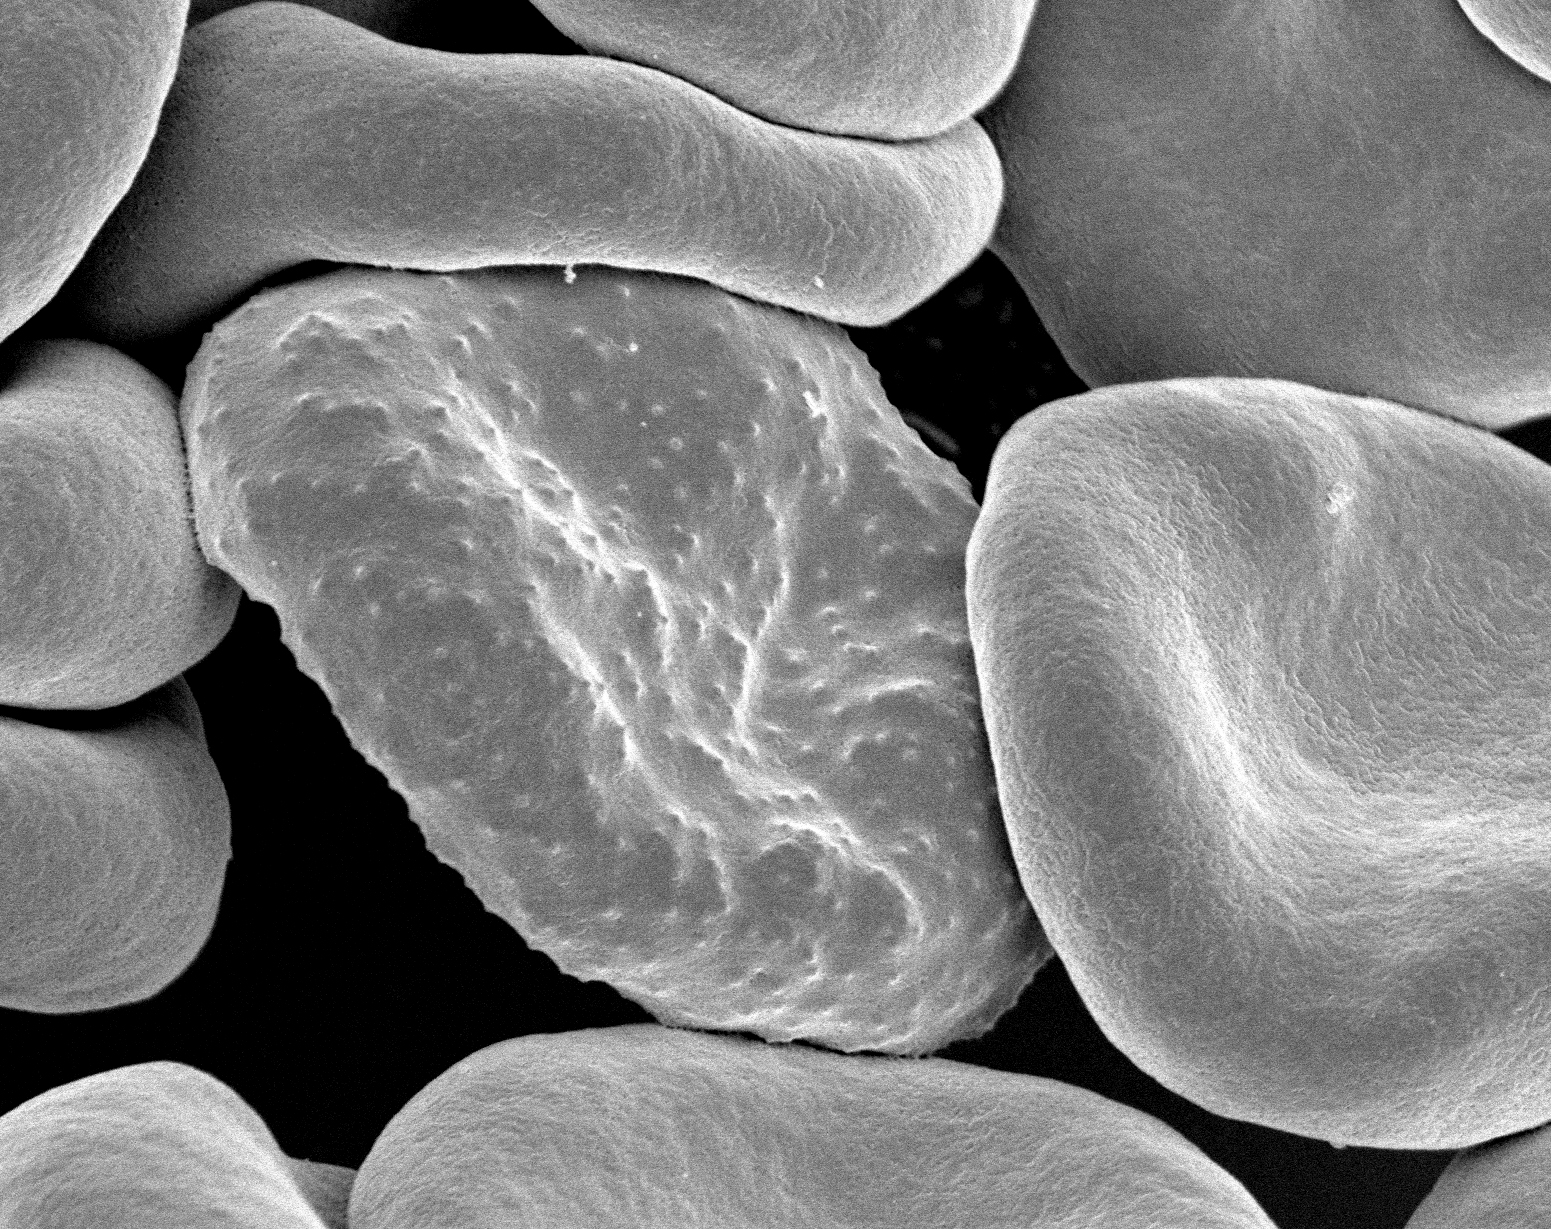 Red blood cells infected with Plasmodium falciparum, the parasite that causes malaria in humans. During its development, the parasite forms protrusions called 'knobs' on the surface of its host red blood cell which enable it to avoid destruction and cause inflammation. 